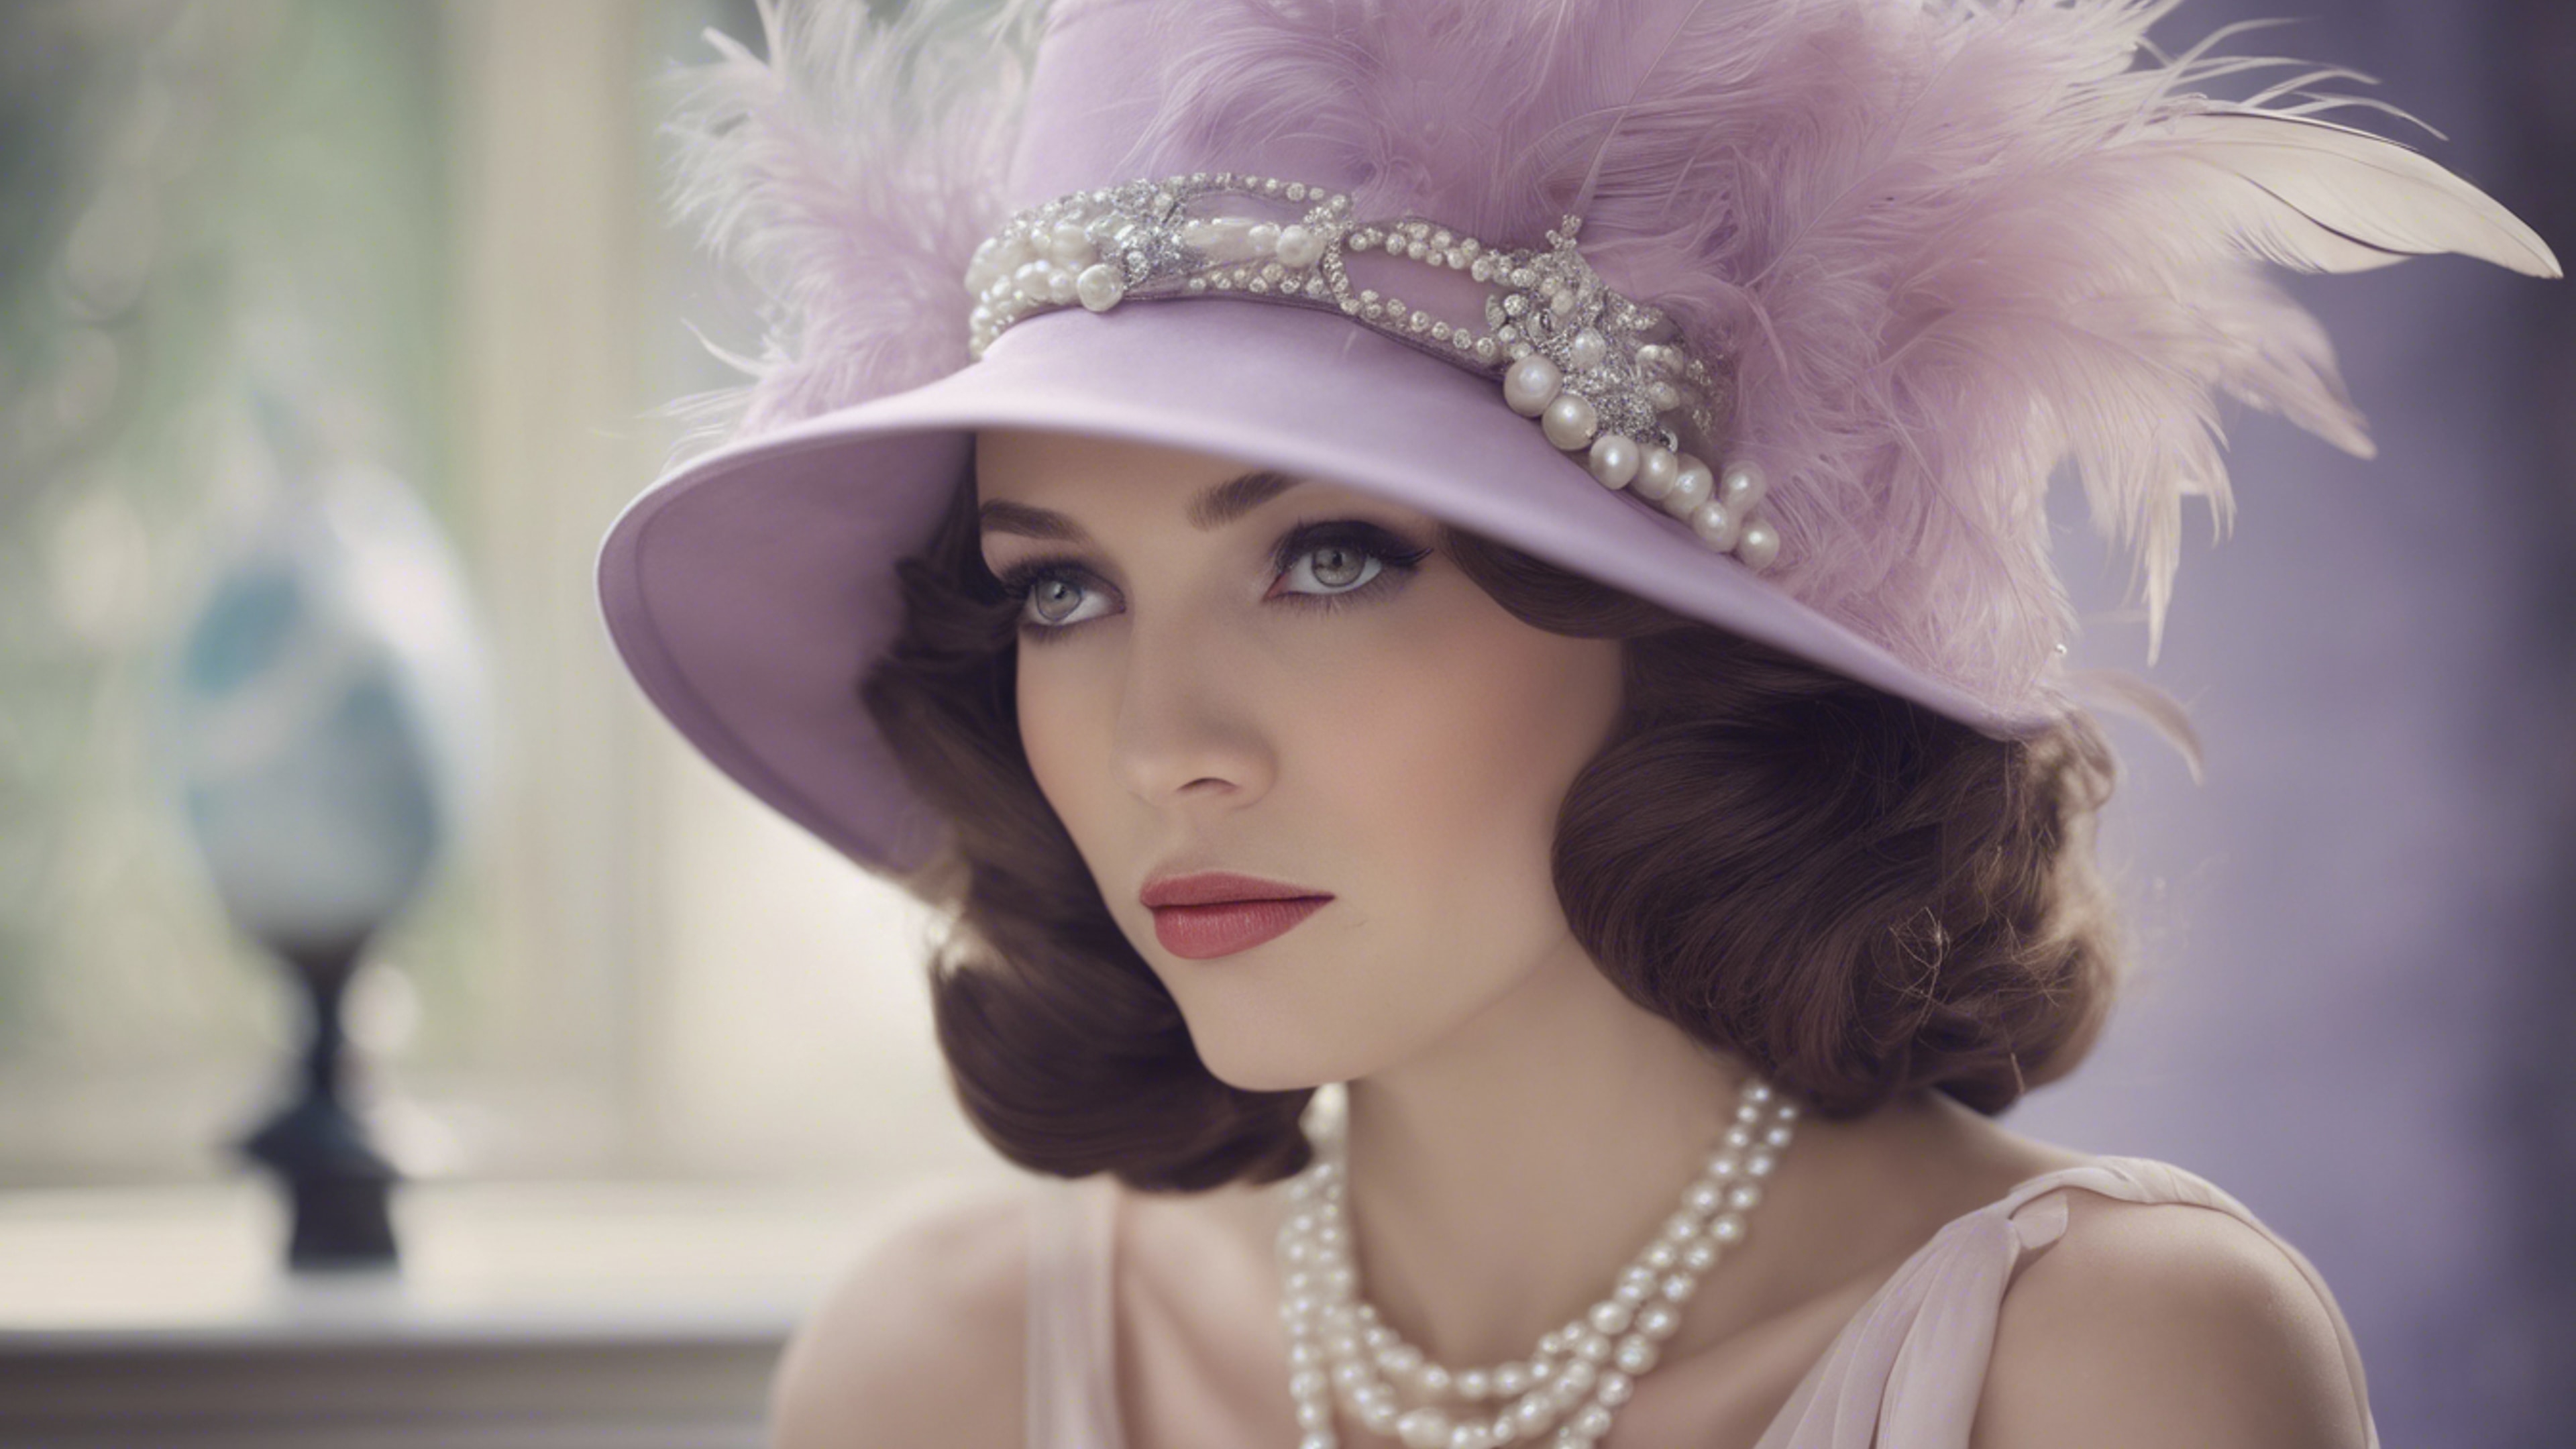 An elegant pastel purple hat adorned with feathers and pearls, typical of 1920’s fashion. Tapetai[175d38ecde9e405fb27c]